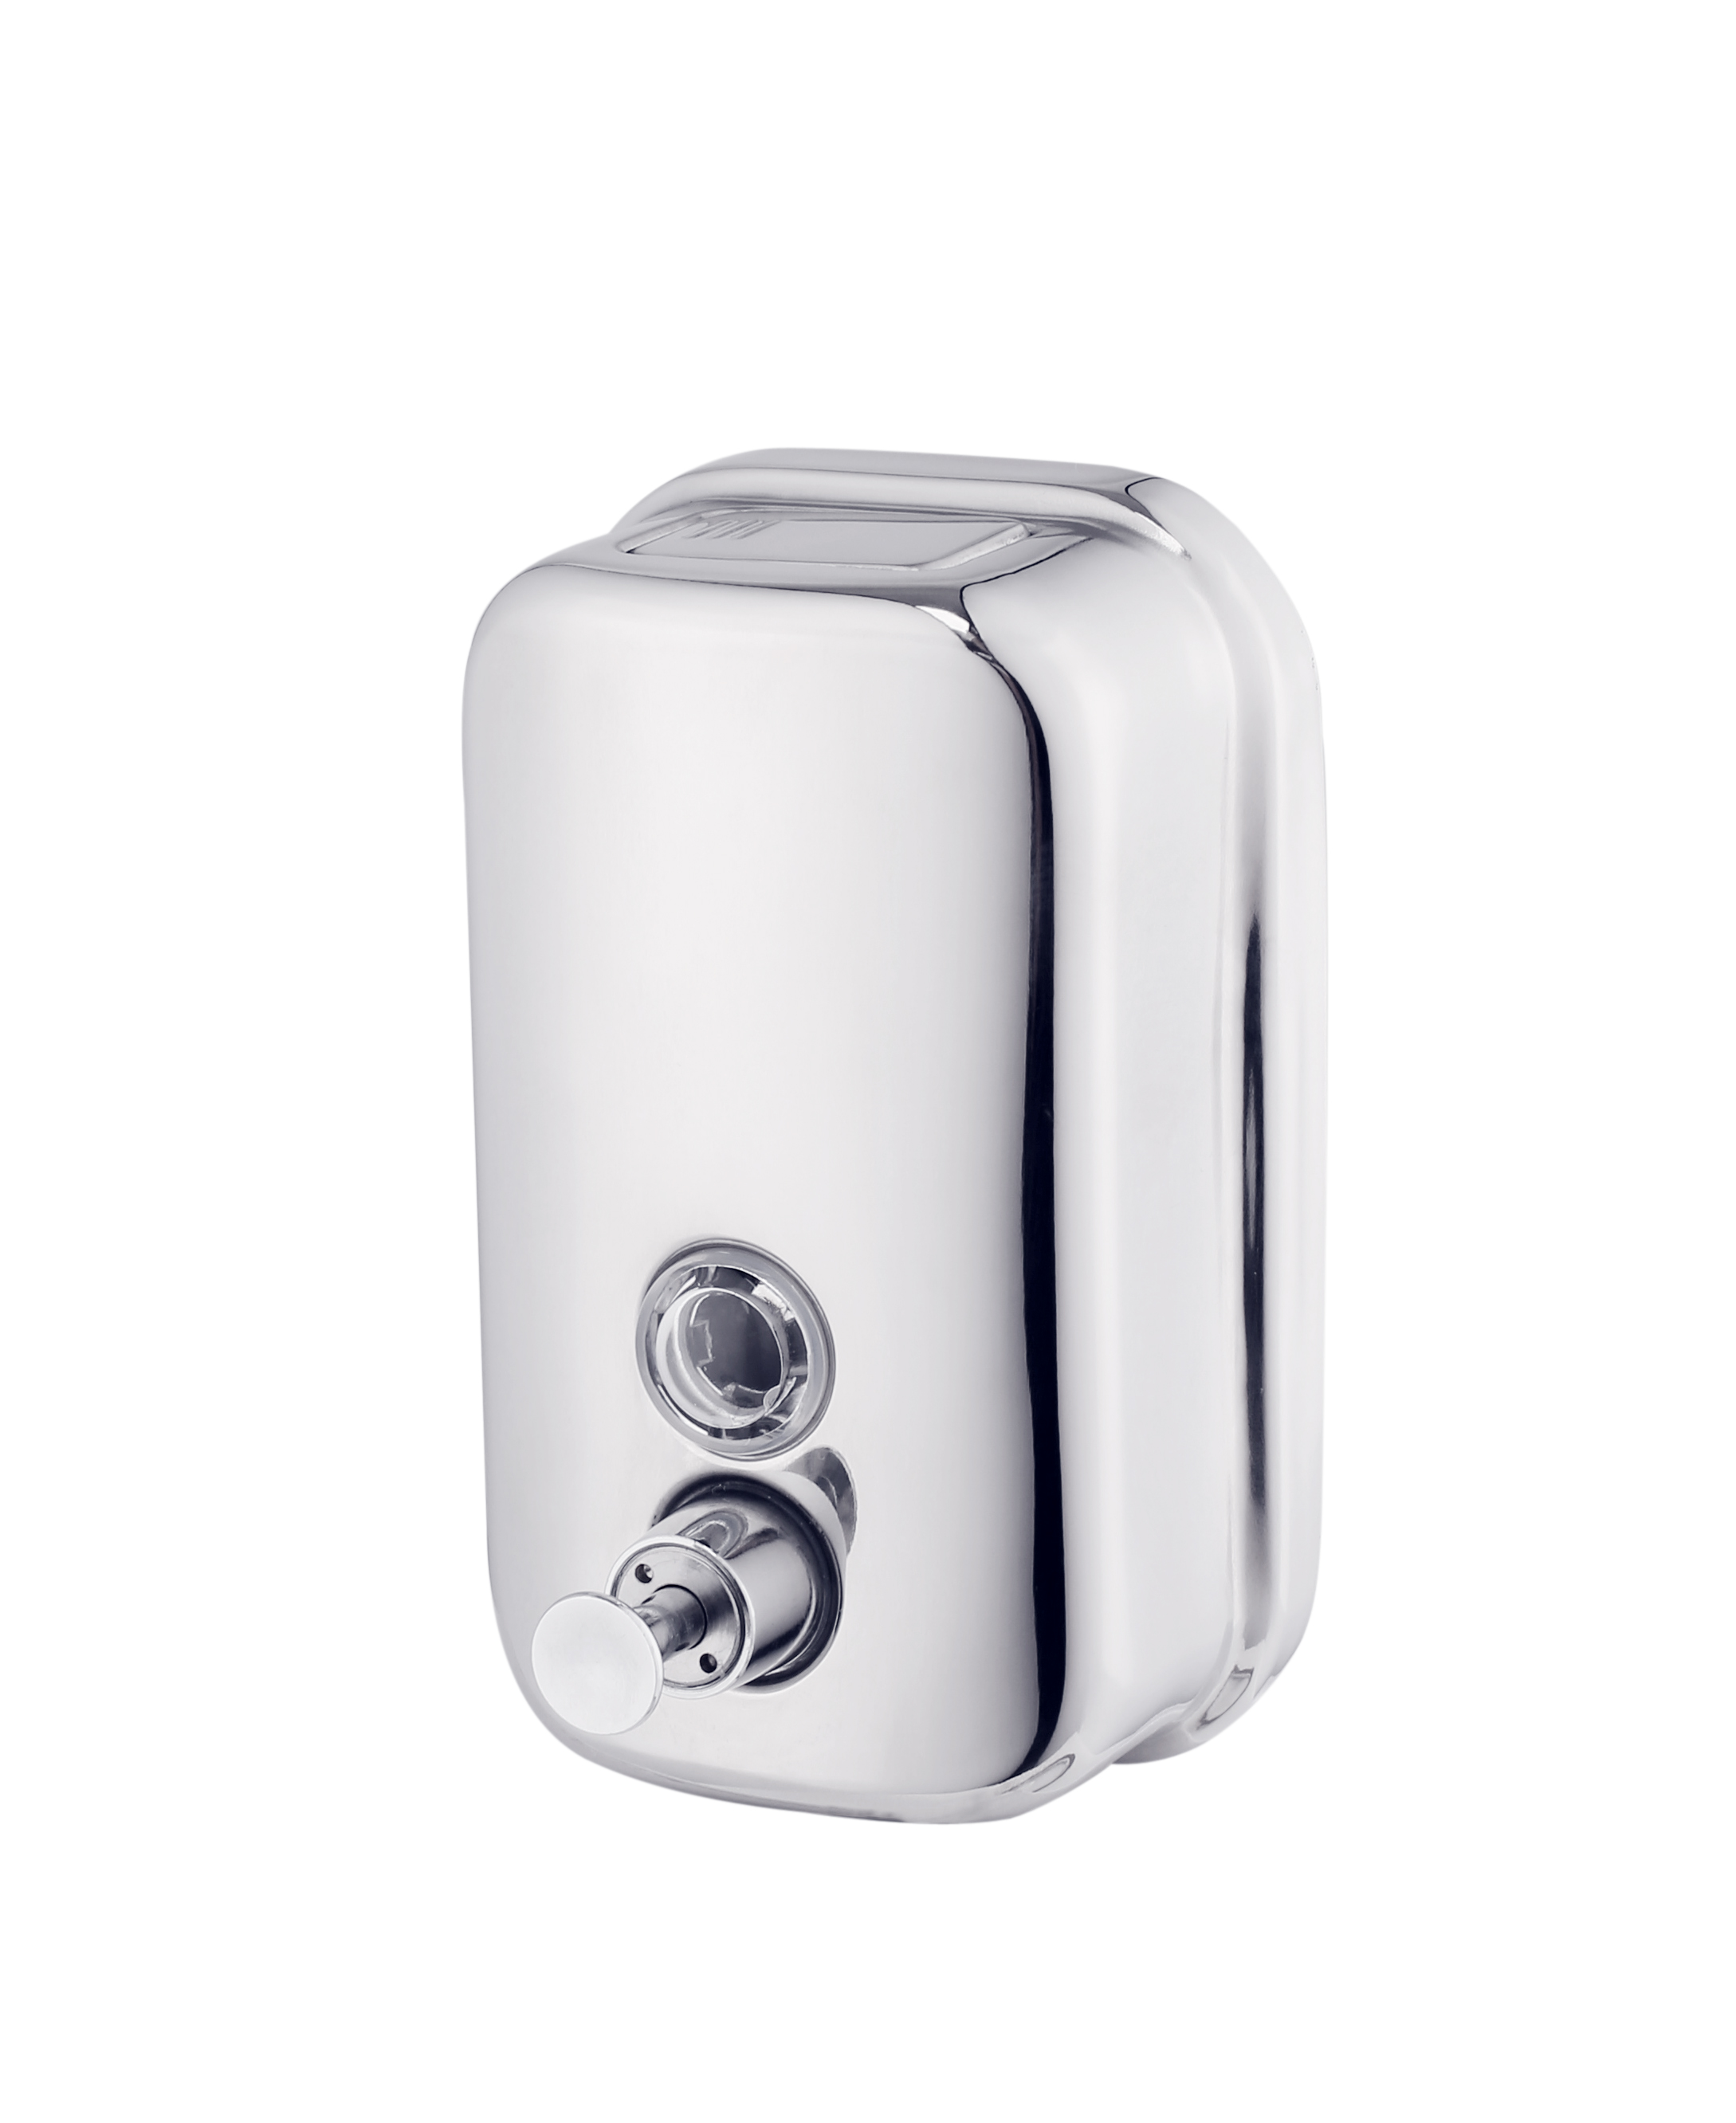 Mirror Stainless Steel Soap Dispenser Without Lock